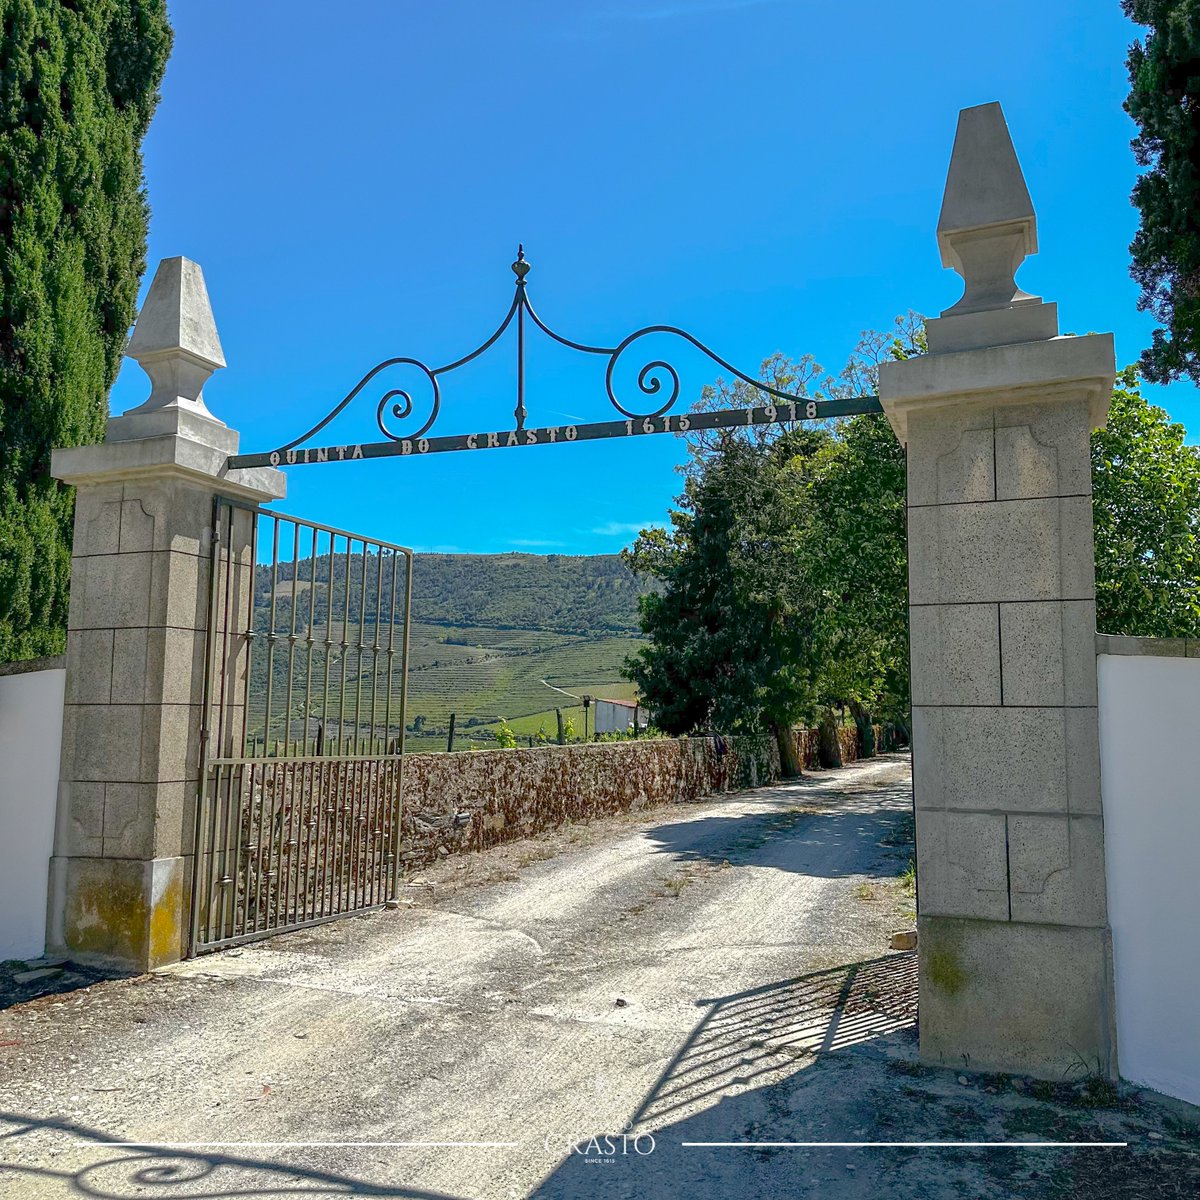 At the old entrance gate, the inscription 'Quinta do Crasto 1615-1918' marks two emblematic dates in the property's history. (...) 🍷
👉🏼 Learn more about the history of the property here:
quintadocrasto.pt/history/?lang=…
#Travel #Douro #DouroWines #VinhosdoDouro
#Vegan #Wine #Wines #Vinho